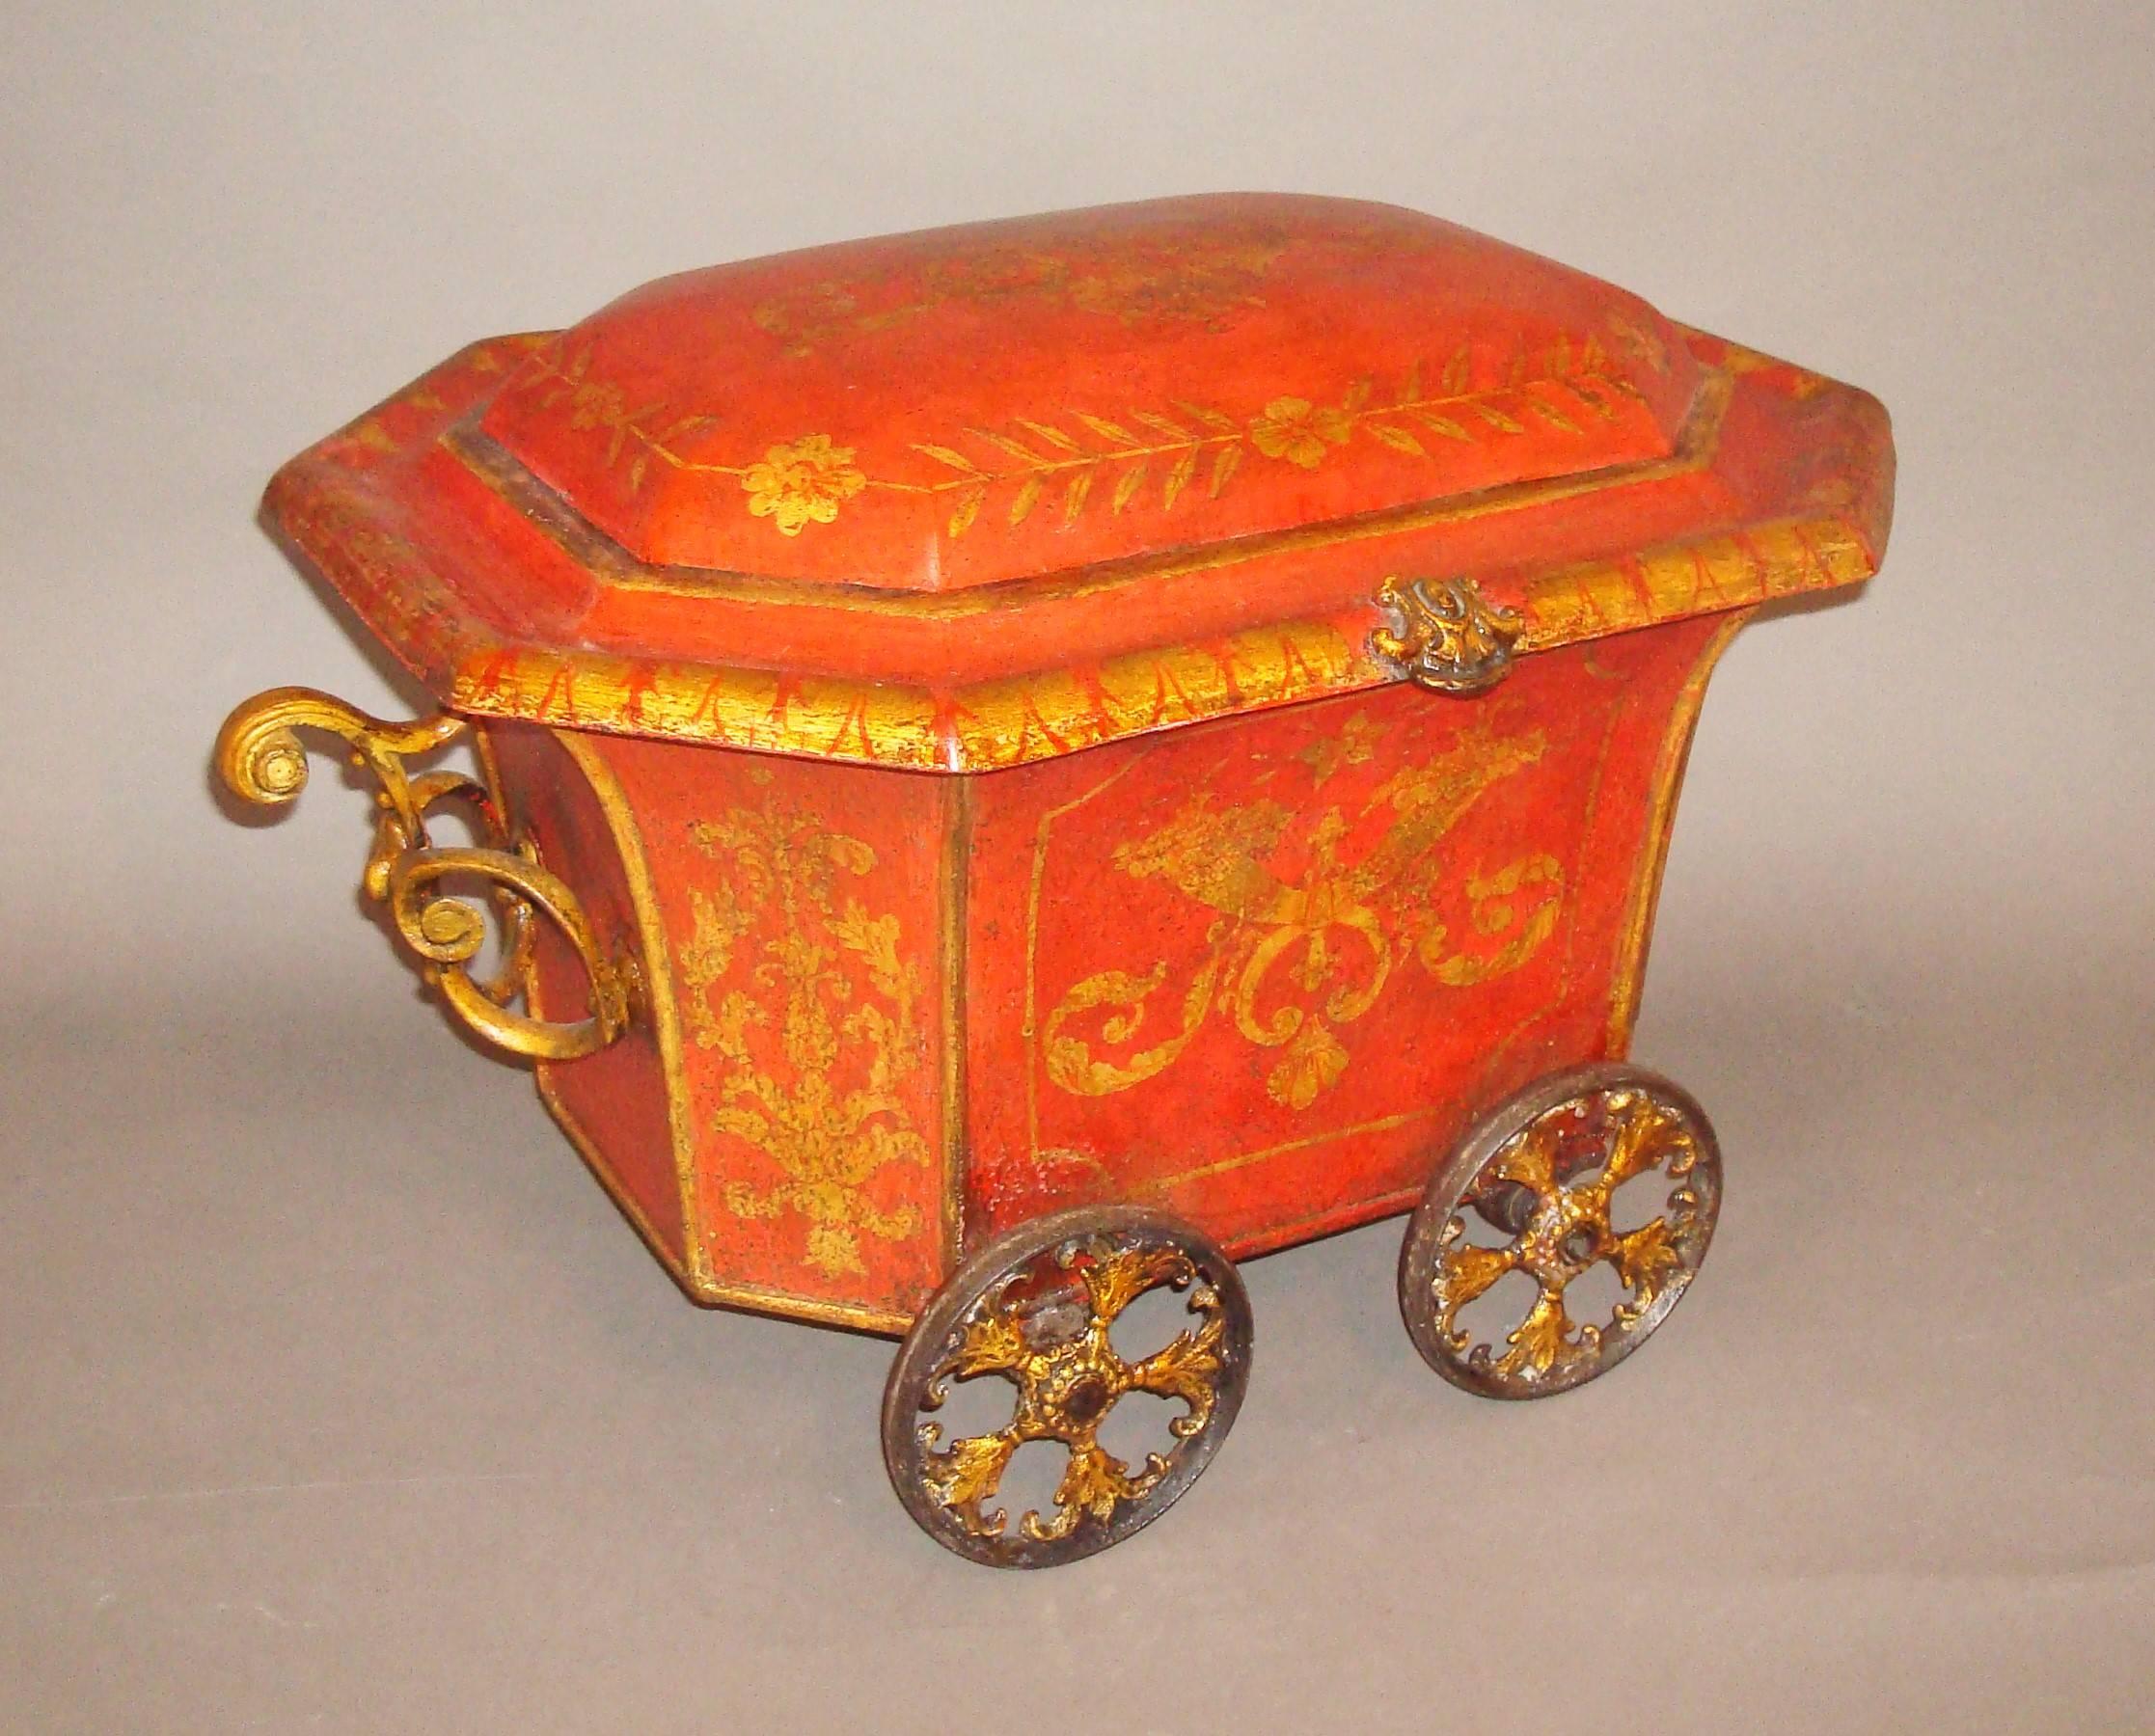 Good Regency painted tole coal box or coal hod; with gilded classical scrolled and foliate decoration on a scarlet red background; of sarcophogus form, the domed lid with shaped surround and a small gilded iron handle to the front. The main body